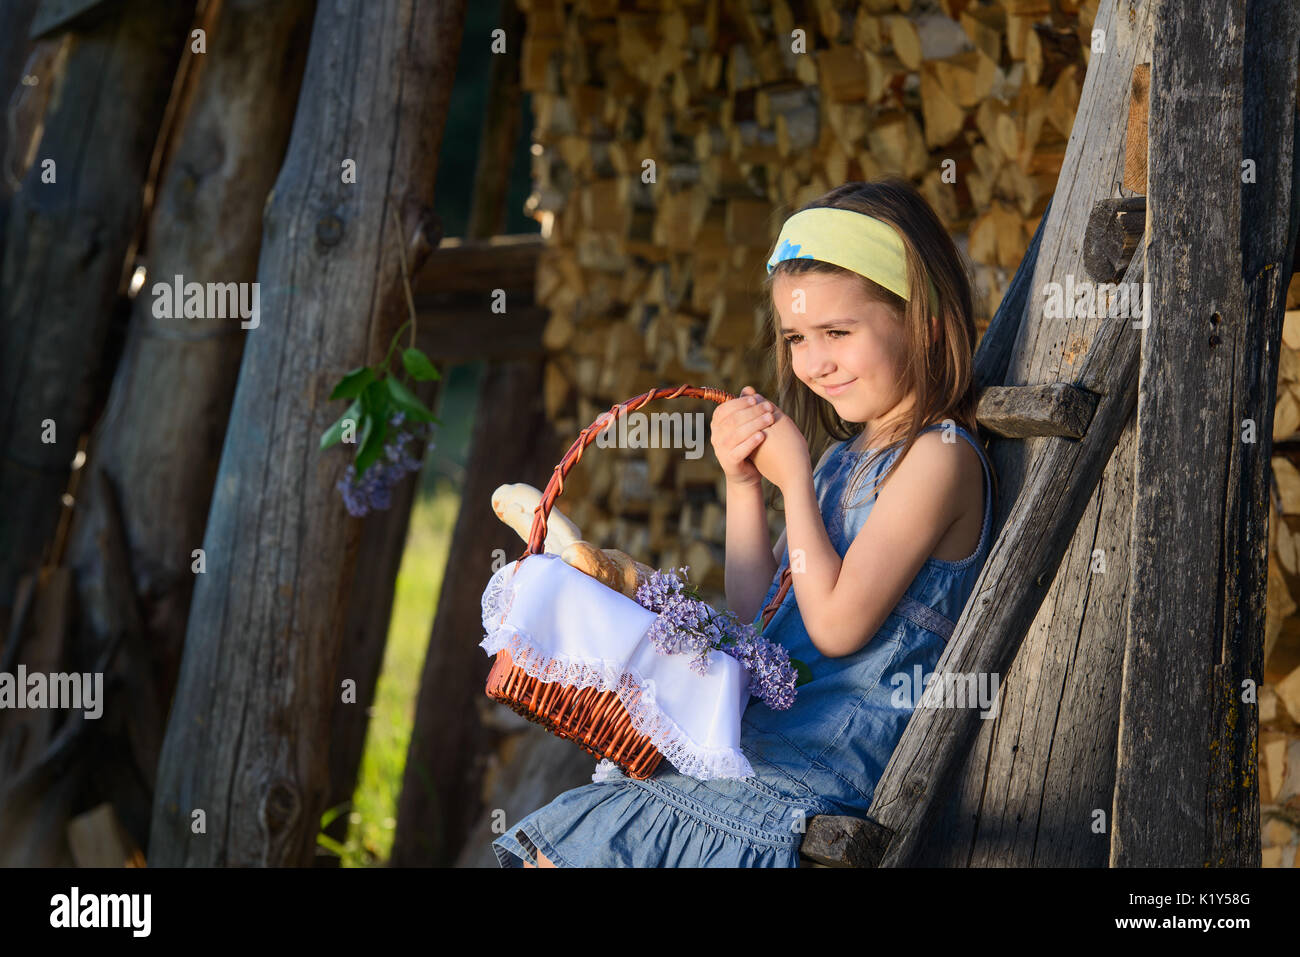 Cute smiling little girl holding a basket of flowers. Portrait in profile. Stock Photo